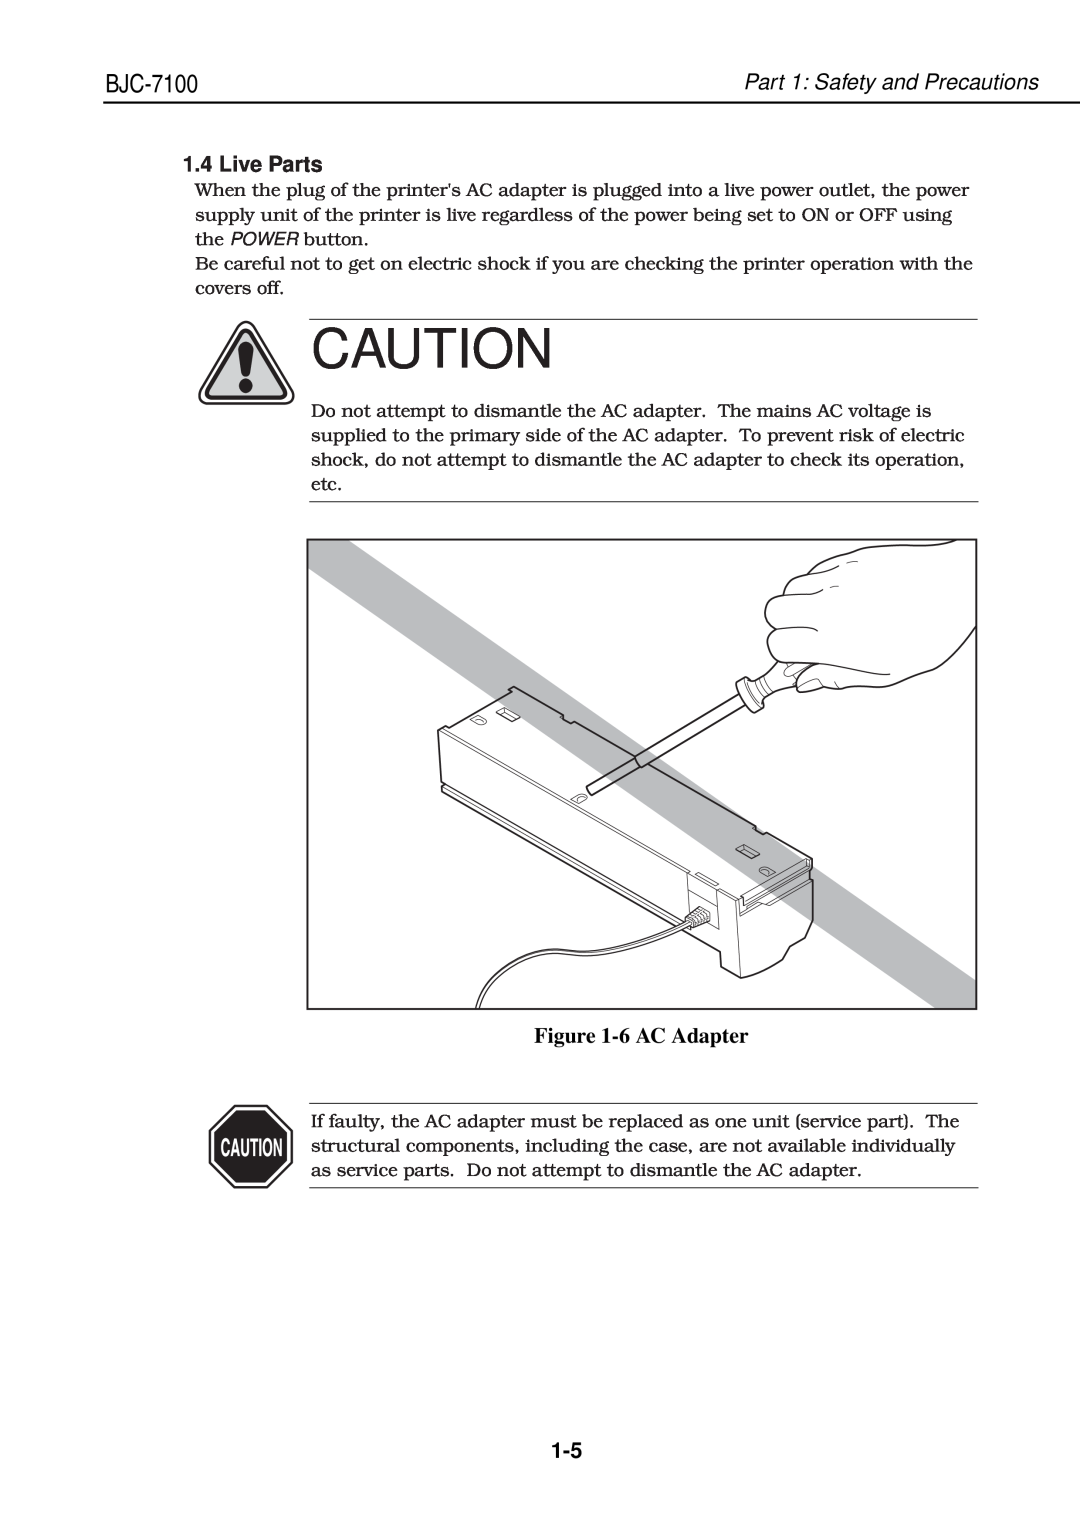 Canon QY8-1360-000 manual Live Parts, 6 AC Adapter, BJC-7100, Part 1 Safety and Precautions 